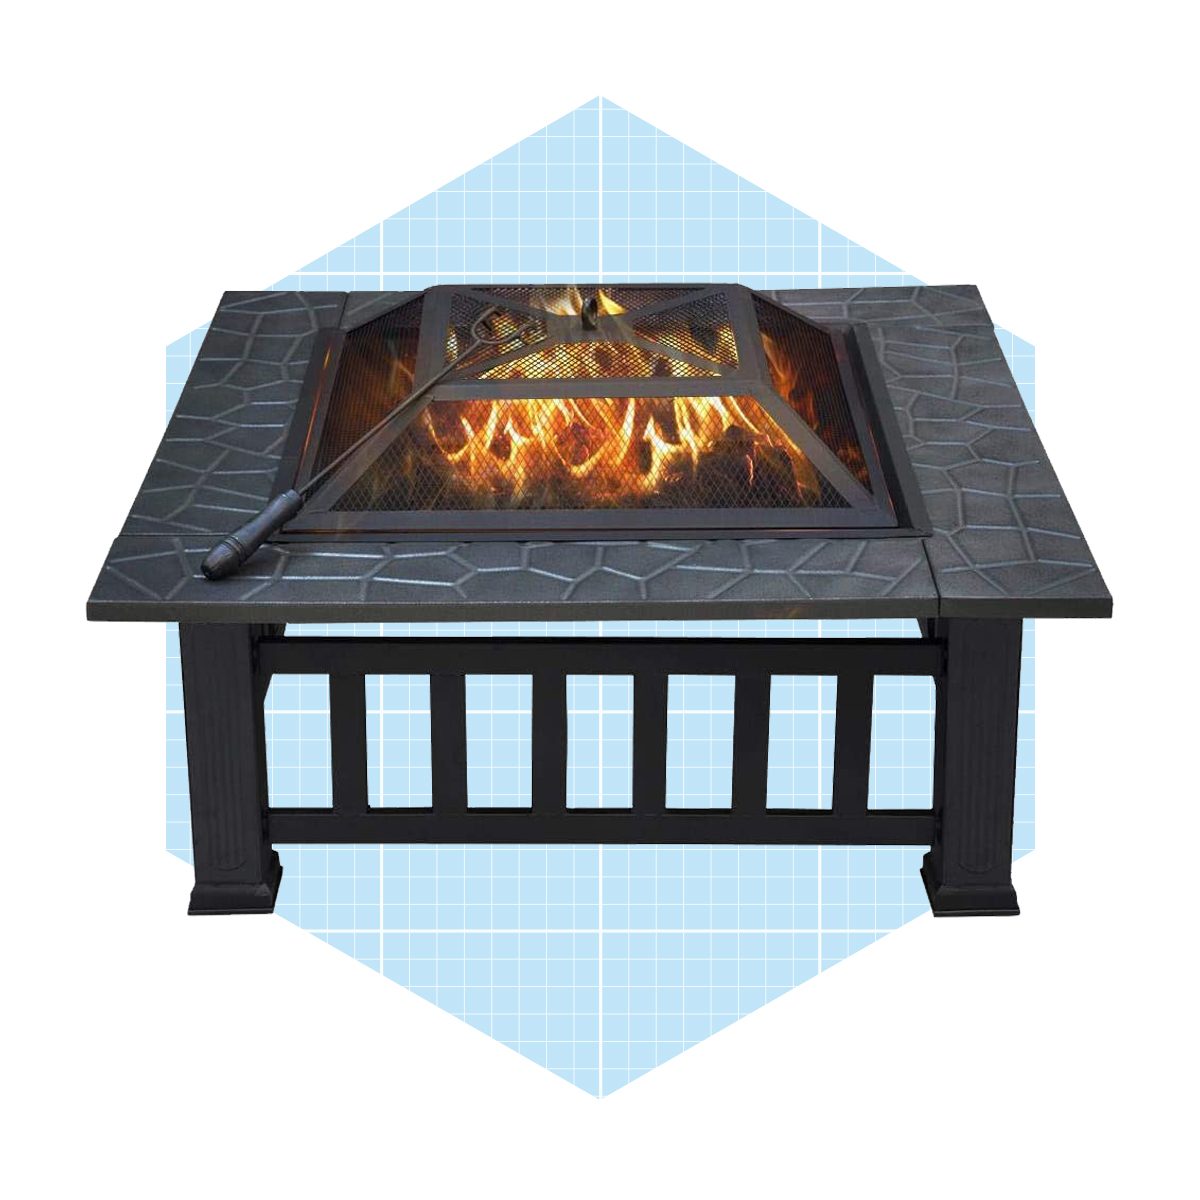 Yaheetech Multifunctional Fire Pit Table